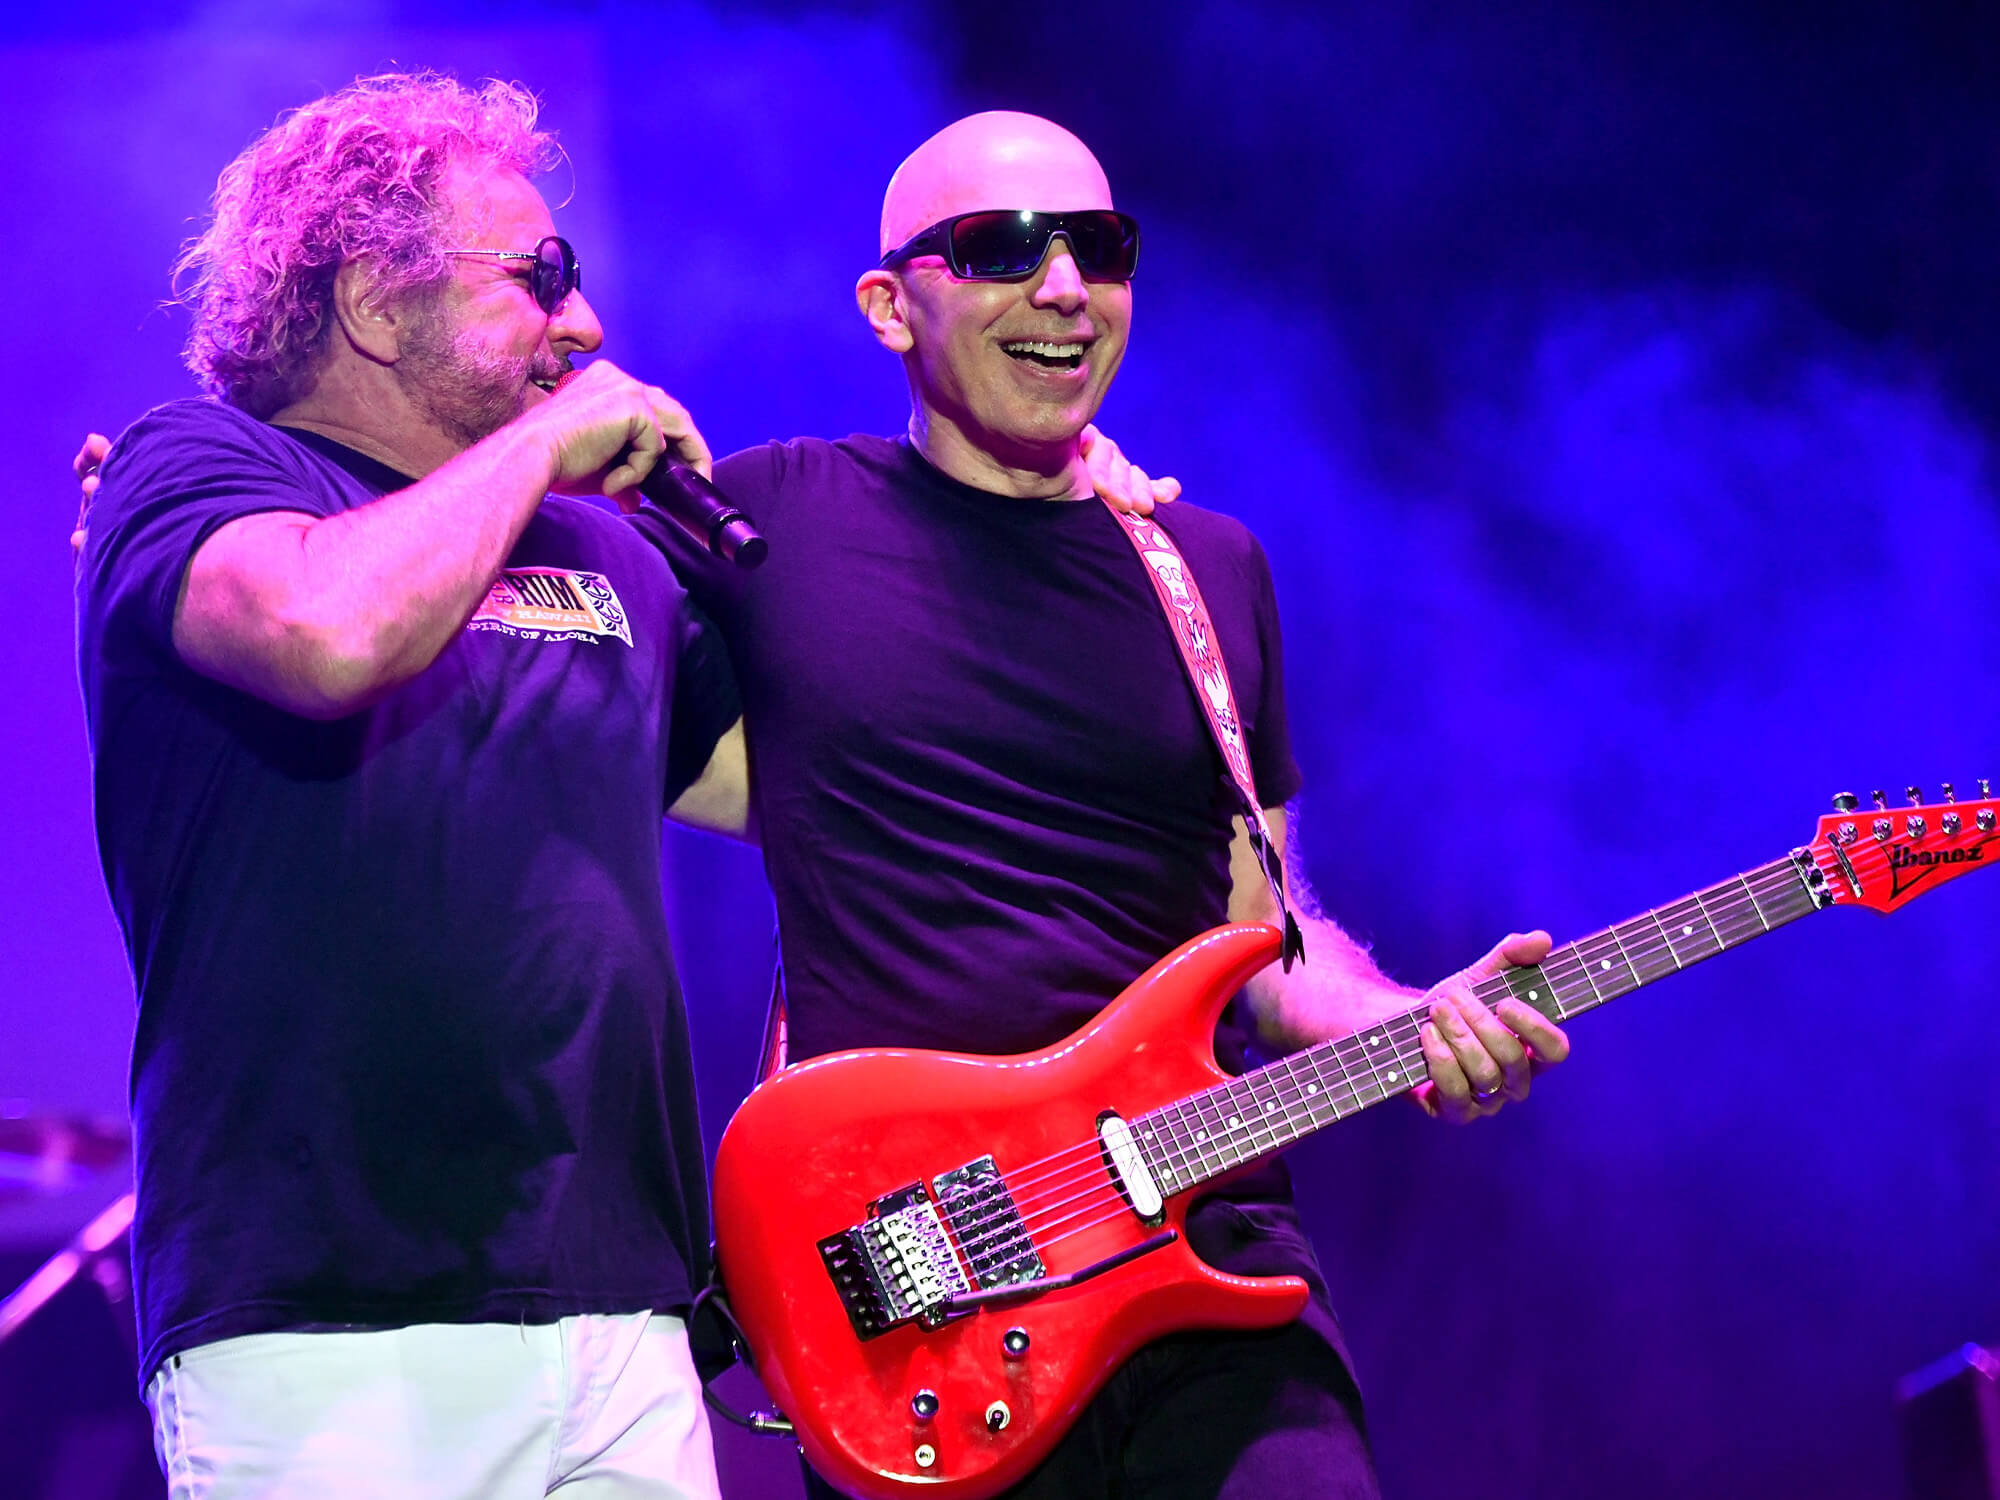 Sammy Hagar with a microphone in one hand, and one arm around Joe Satriani. The pair are on stage, and Satriani is holding a vibrant Ibanez electric model. Both are smiling.